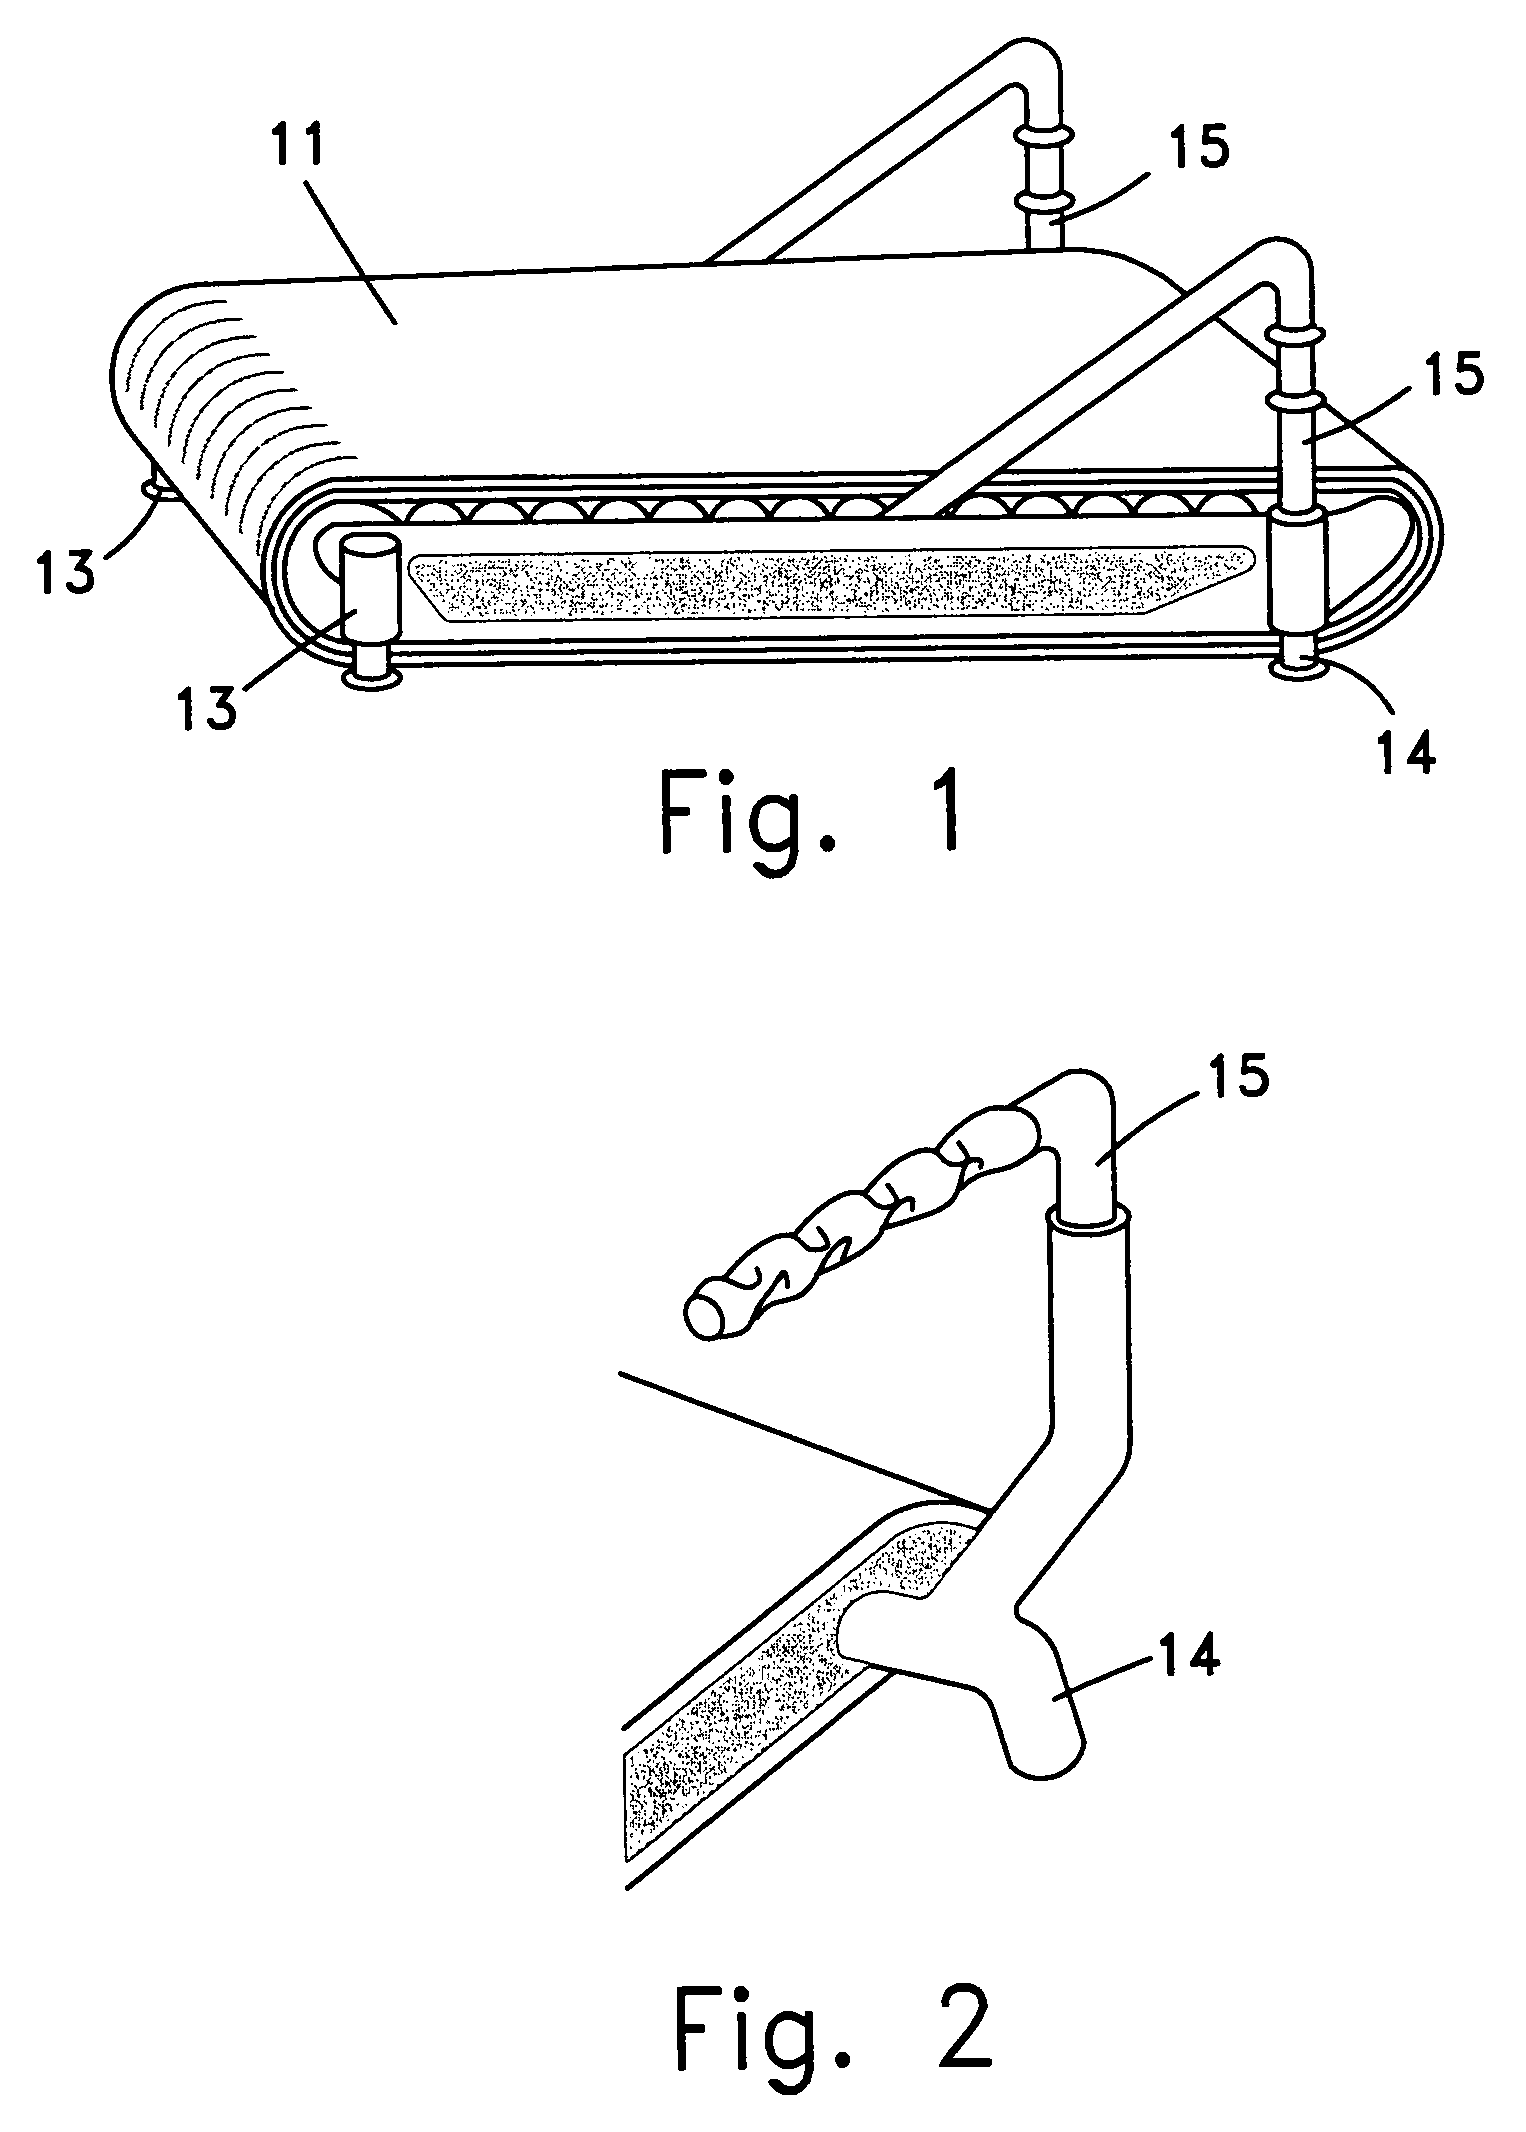 Exercise apparatus for mobility recovery and slimming